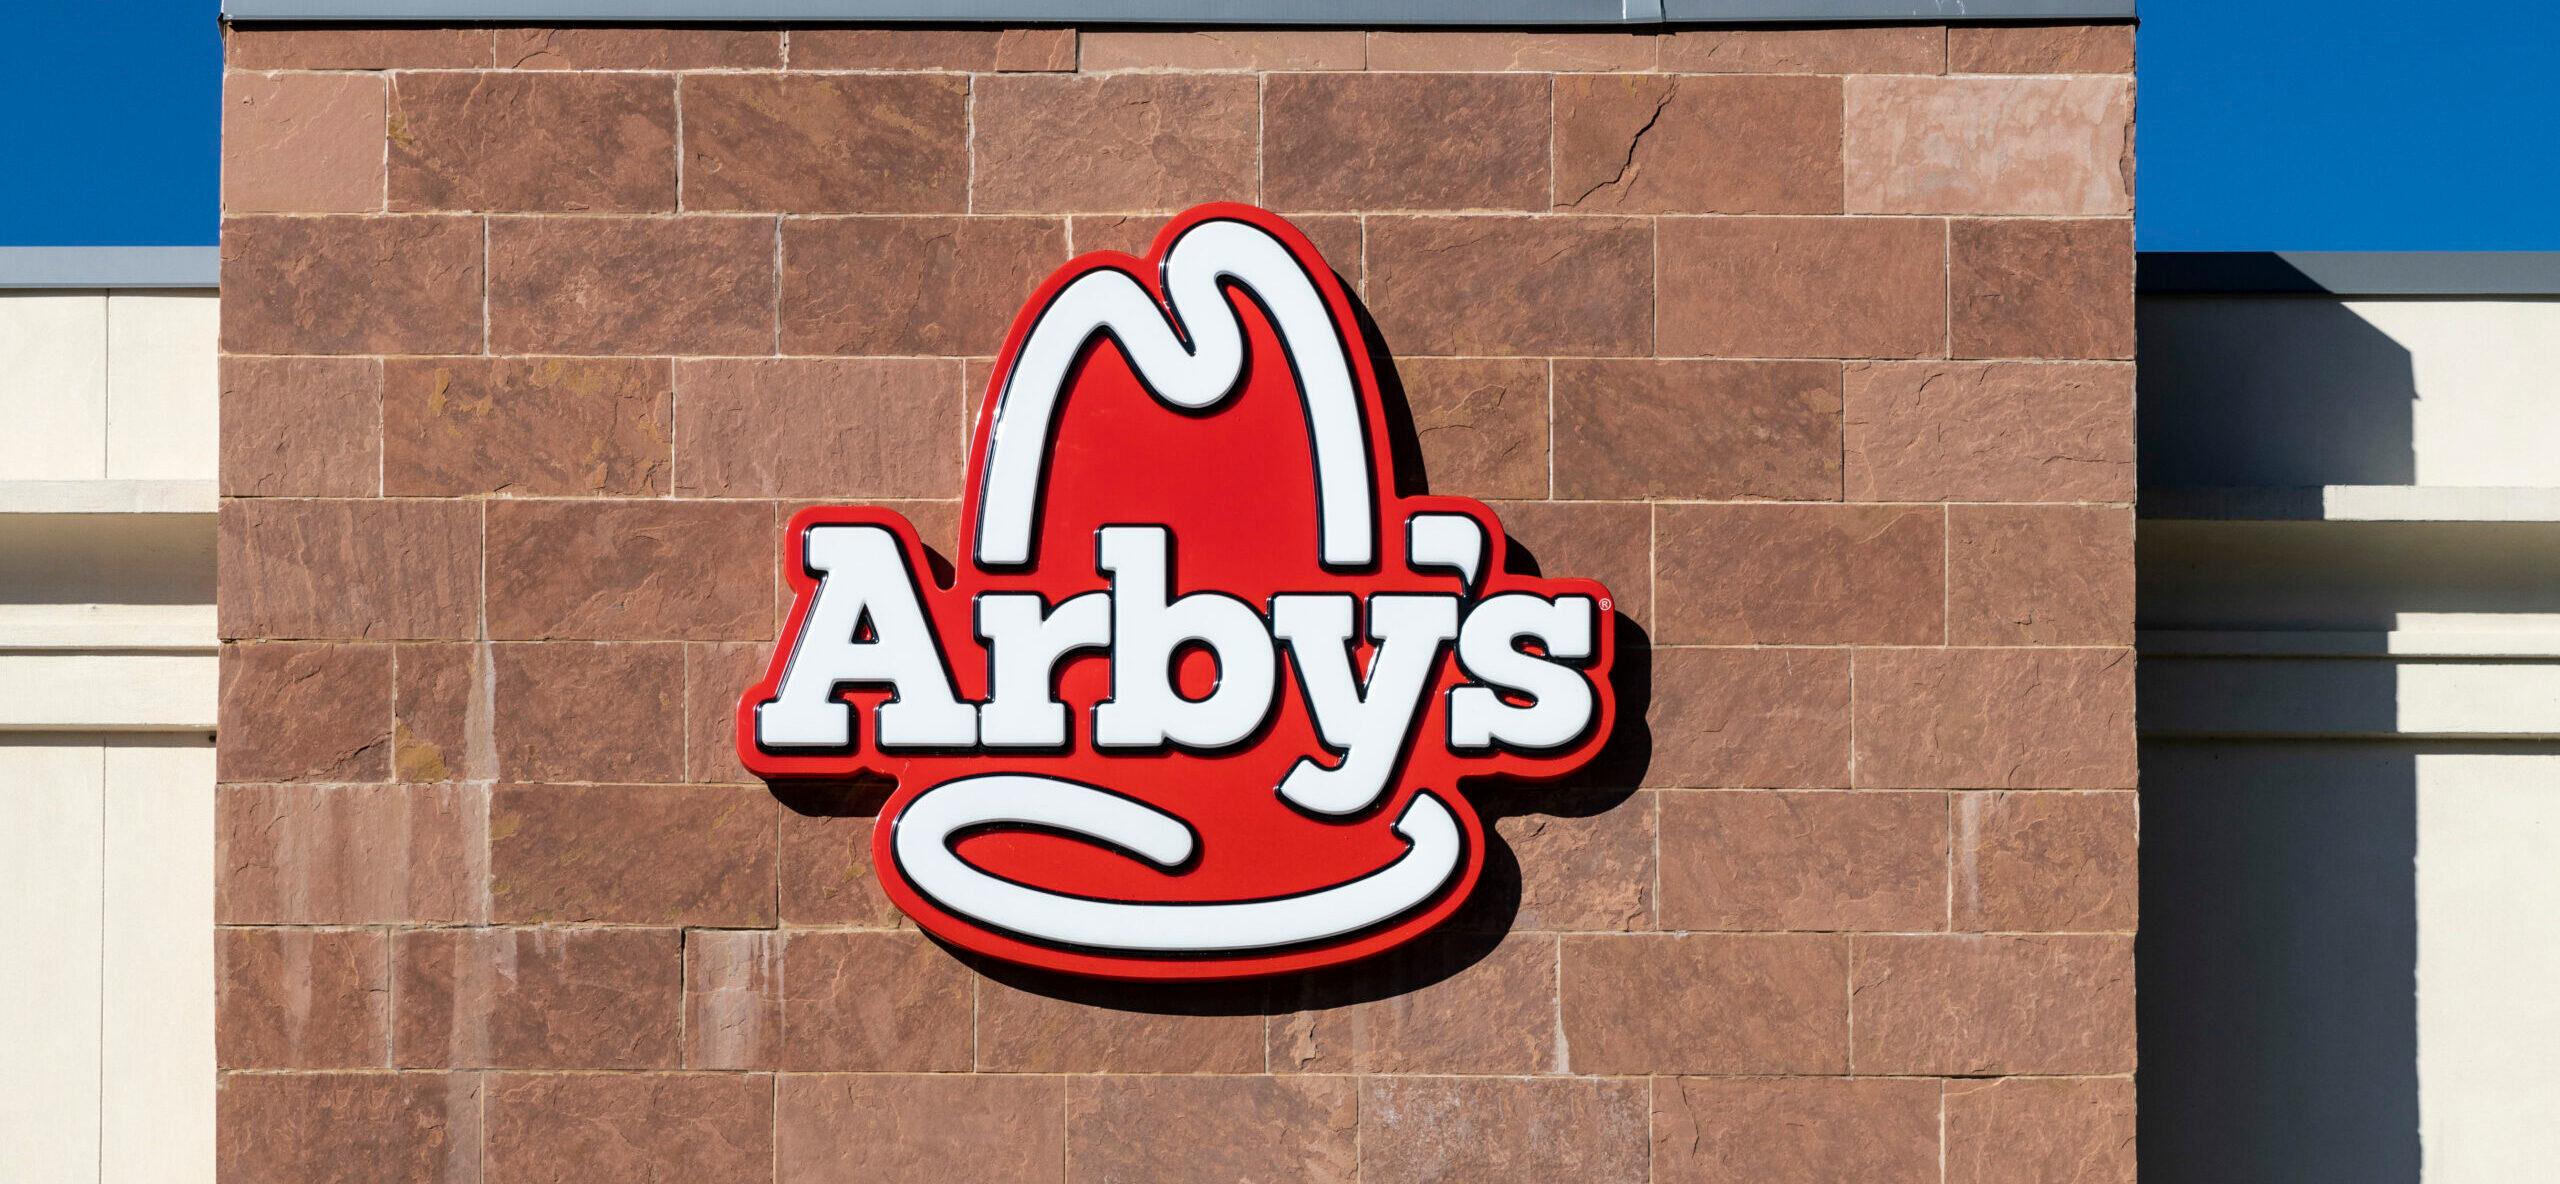 Corpse Found Inside Freezer Of An Arby’s Restaurant in Louisiana